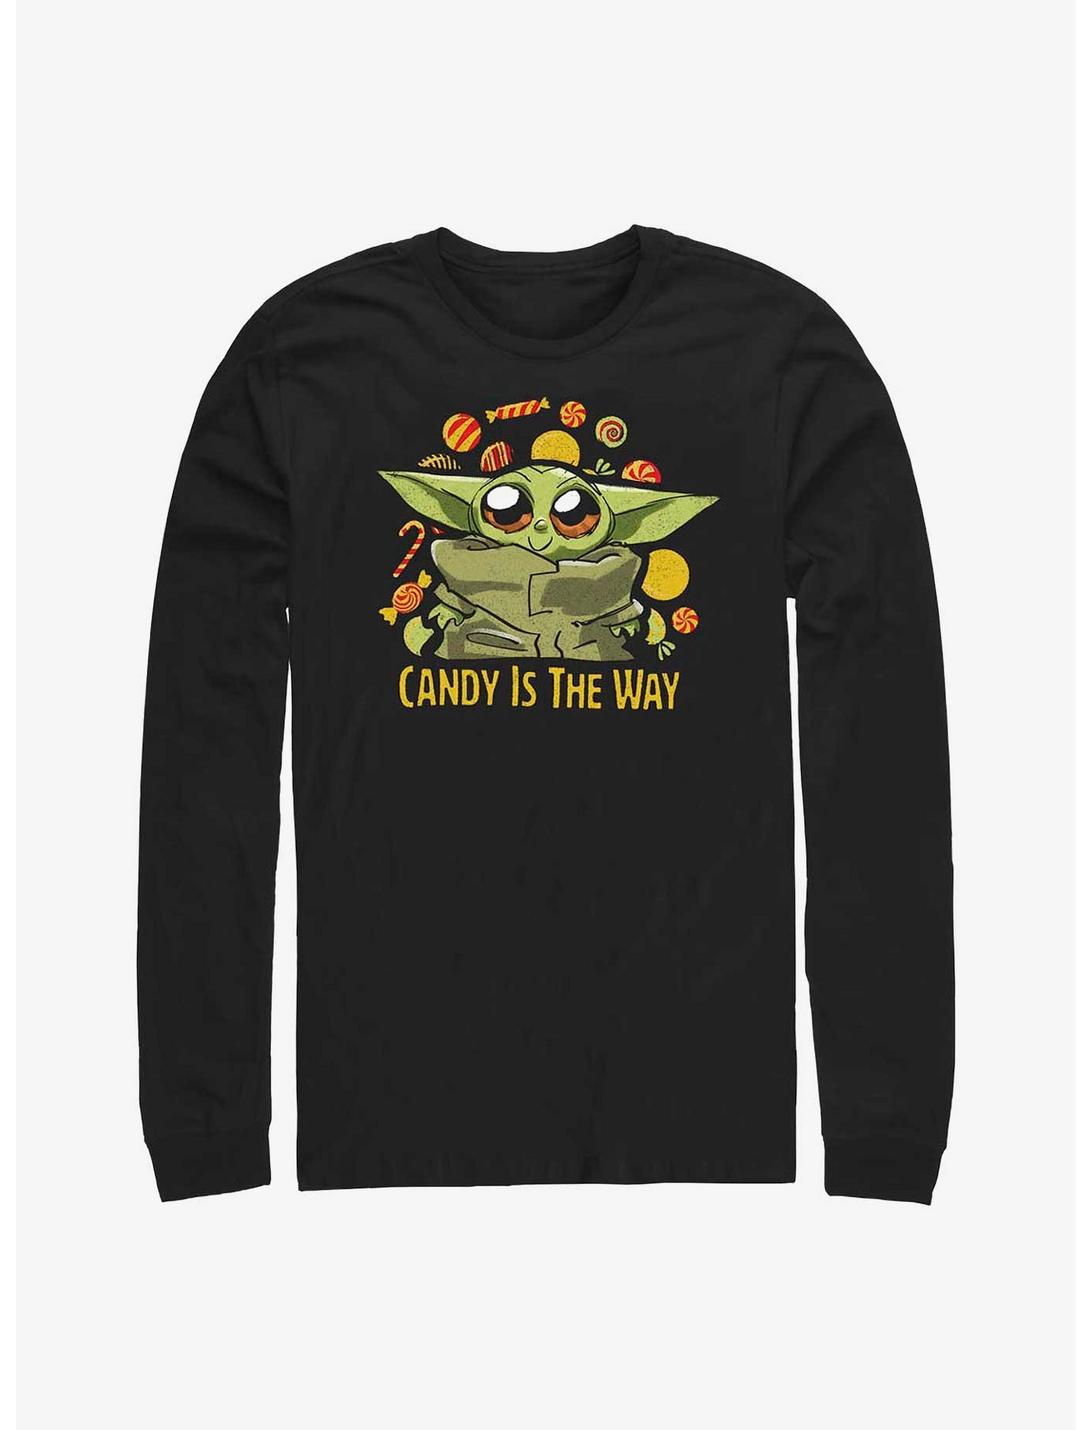 Star Wars The Mandalorian Candy Is The Way Long-Sleeve T-Shirt, BLACK, hi-res